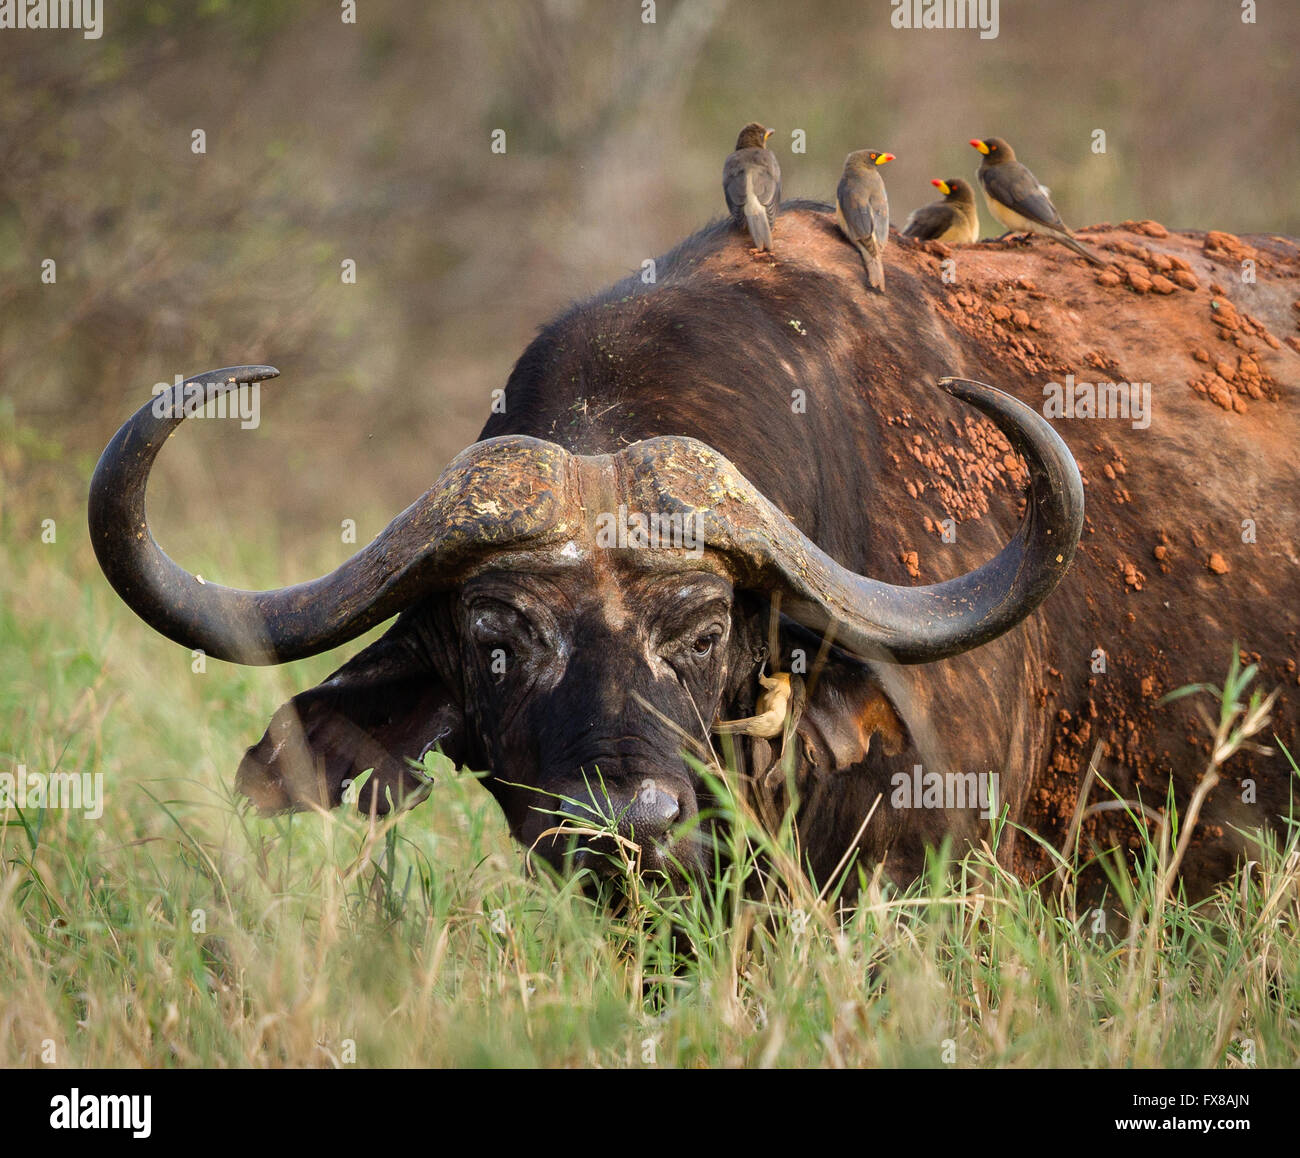 Battered old bull buffalo with attendant cleaning squad of Oxpecker birds one removing ticks from his ear - Tsavo East Kenya Stock Photo